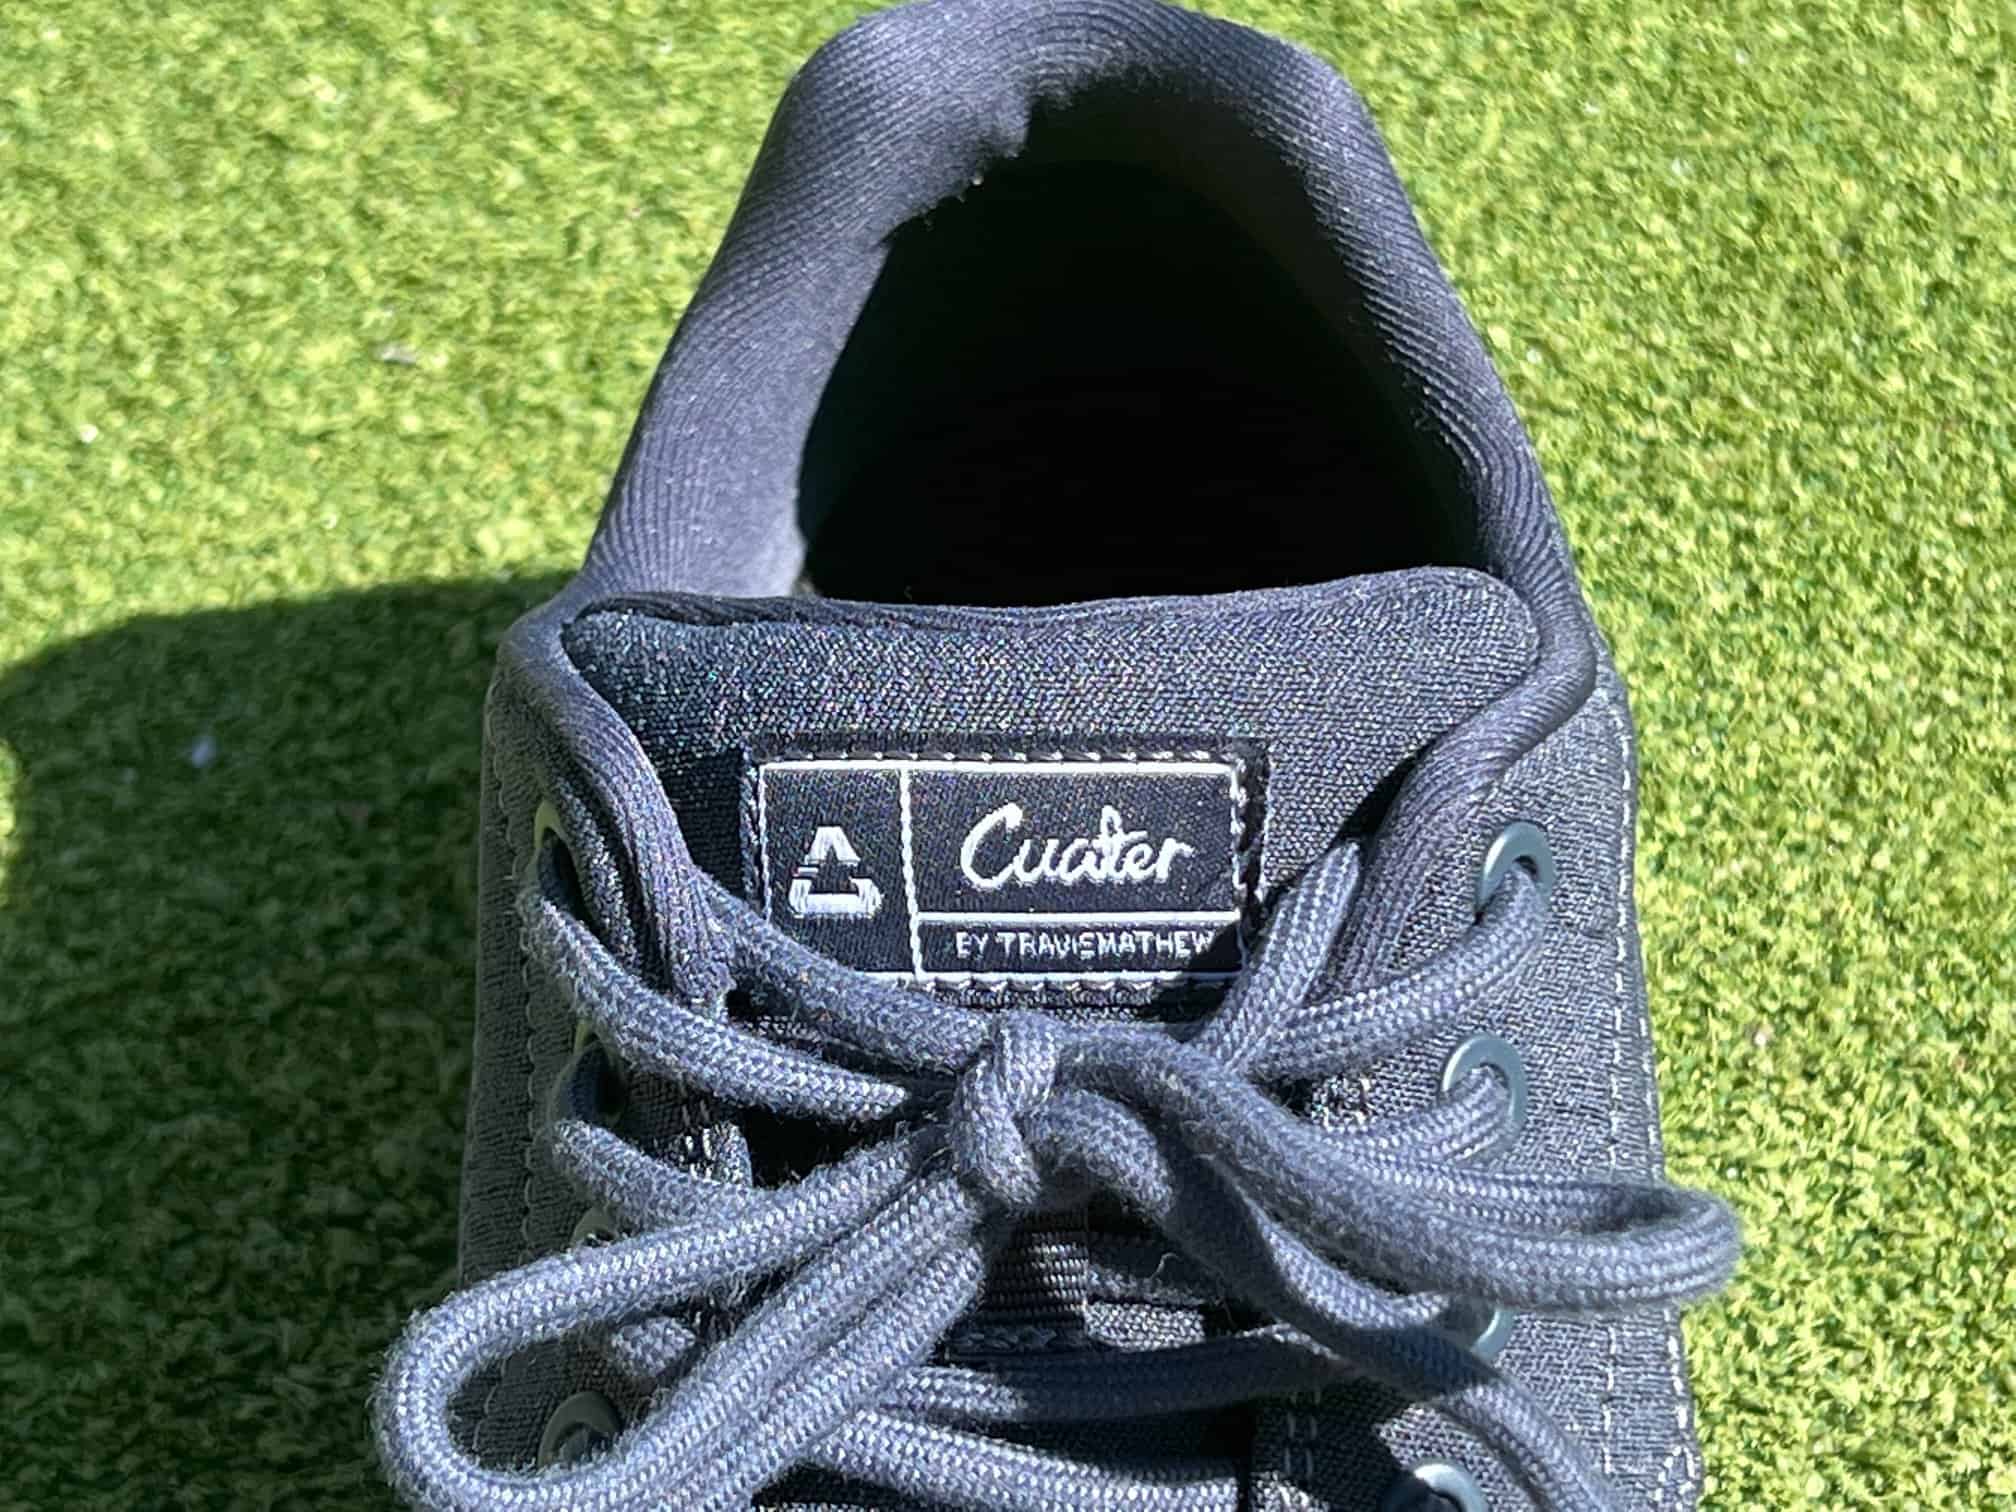 Cuater The Moneymaker And The Daily Shoes Review - Independent Golf Reviews